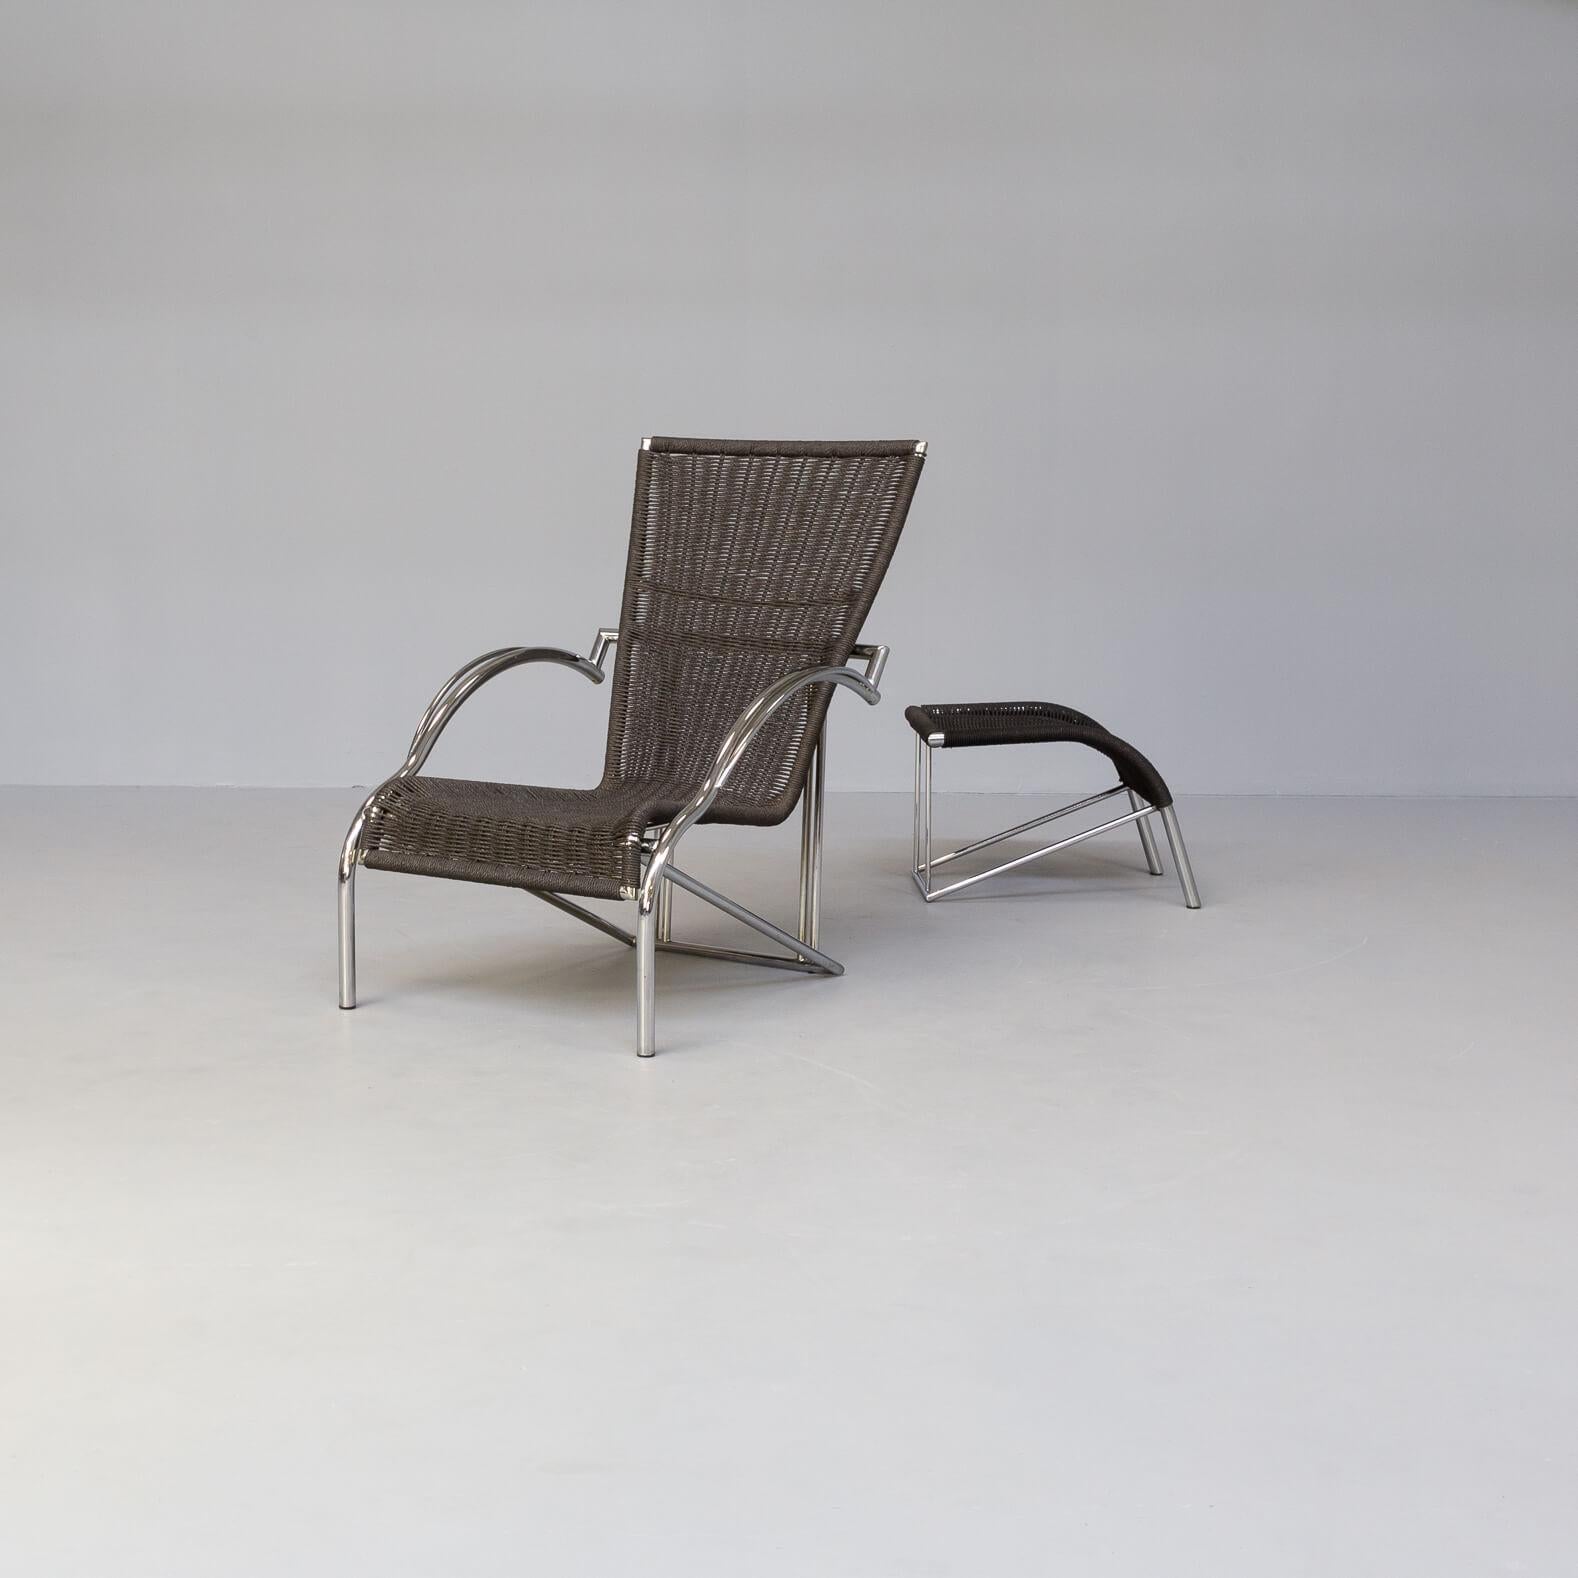 Hartika is a high class outdoor furniture specialist. This Hartika chair can be used inside aswell outdoors. Beautifull chrome design frame with black papercord seat and backrest. Very comfortable chair and ottoman. Set in good condition consistent